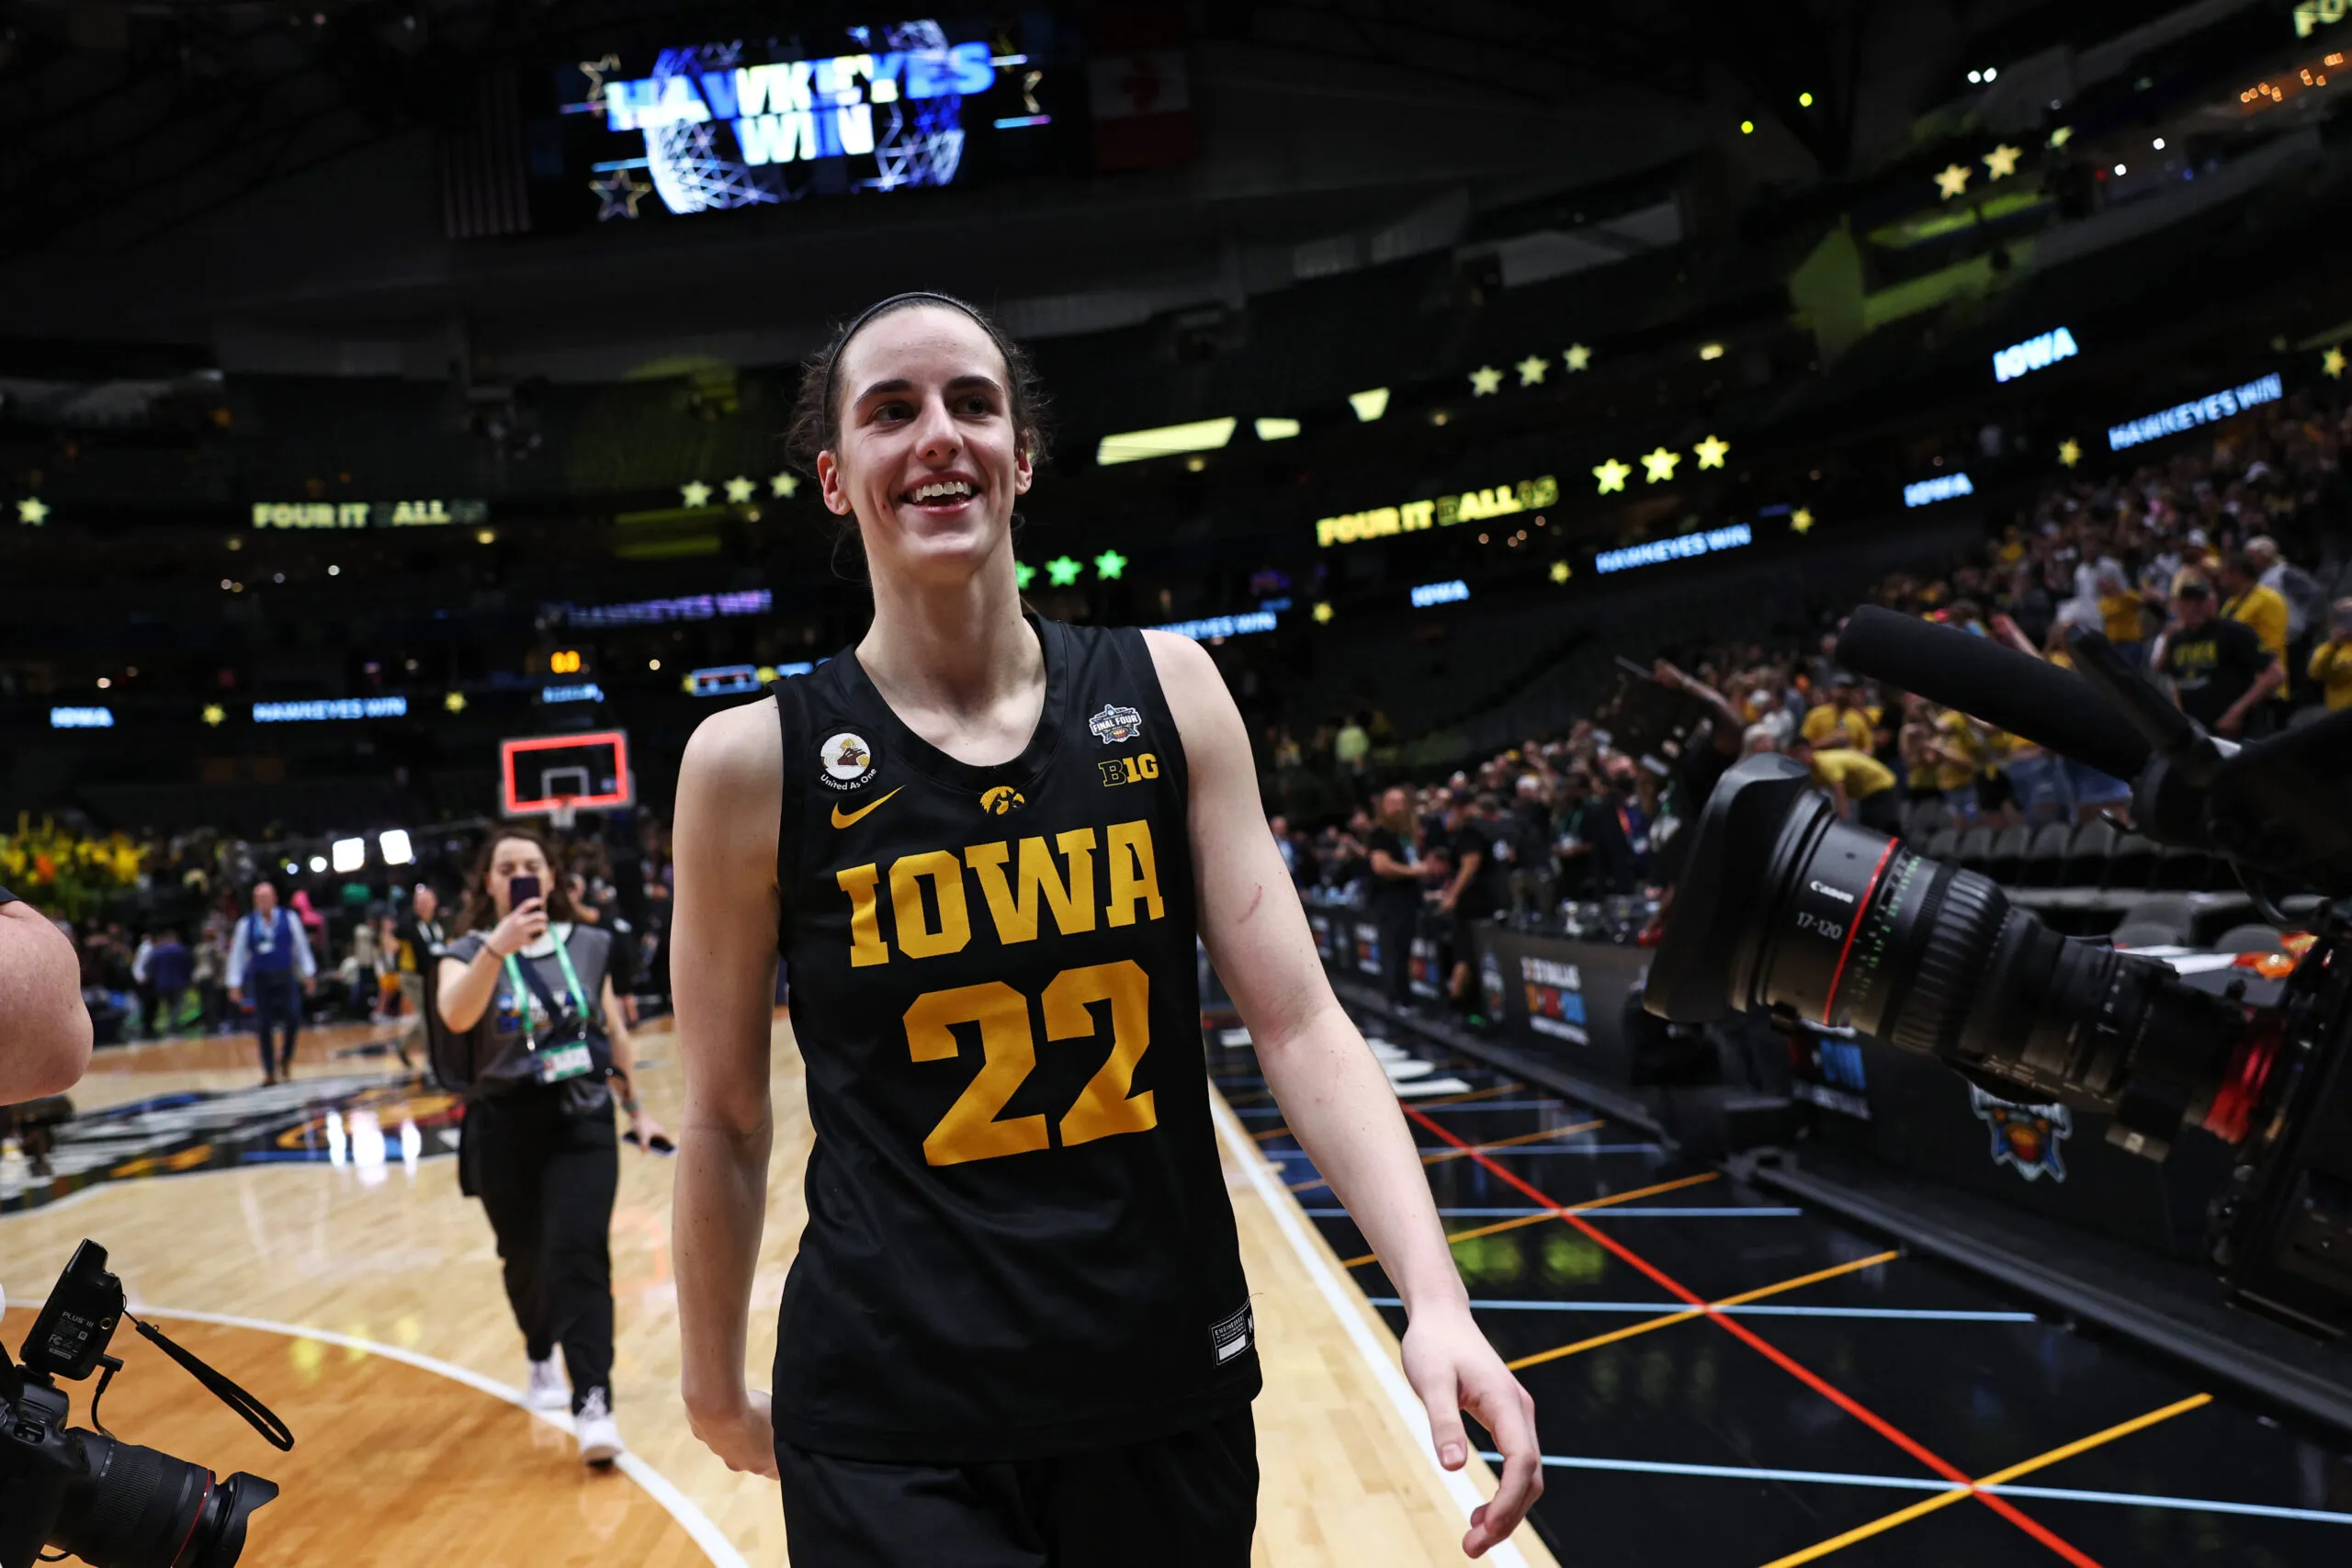 DALLAS, TEXAS - MARCH 31: Caitlin Clark #22 of the Iowa Hawkeyes celebrates after the Iowa Hawkeyes beat the South Carolina Gamecocks 77-73 during the 2023 NCAA Women's Basketball Tournament Final Four semifinal game at American Airlines Center on March 31, 2023 in Dallas, Texas. (Photo by Tom Pennington/Getty Images)